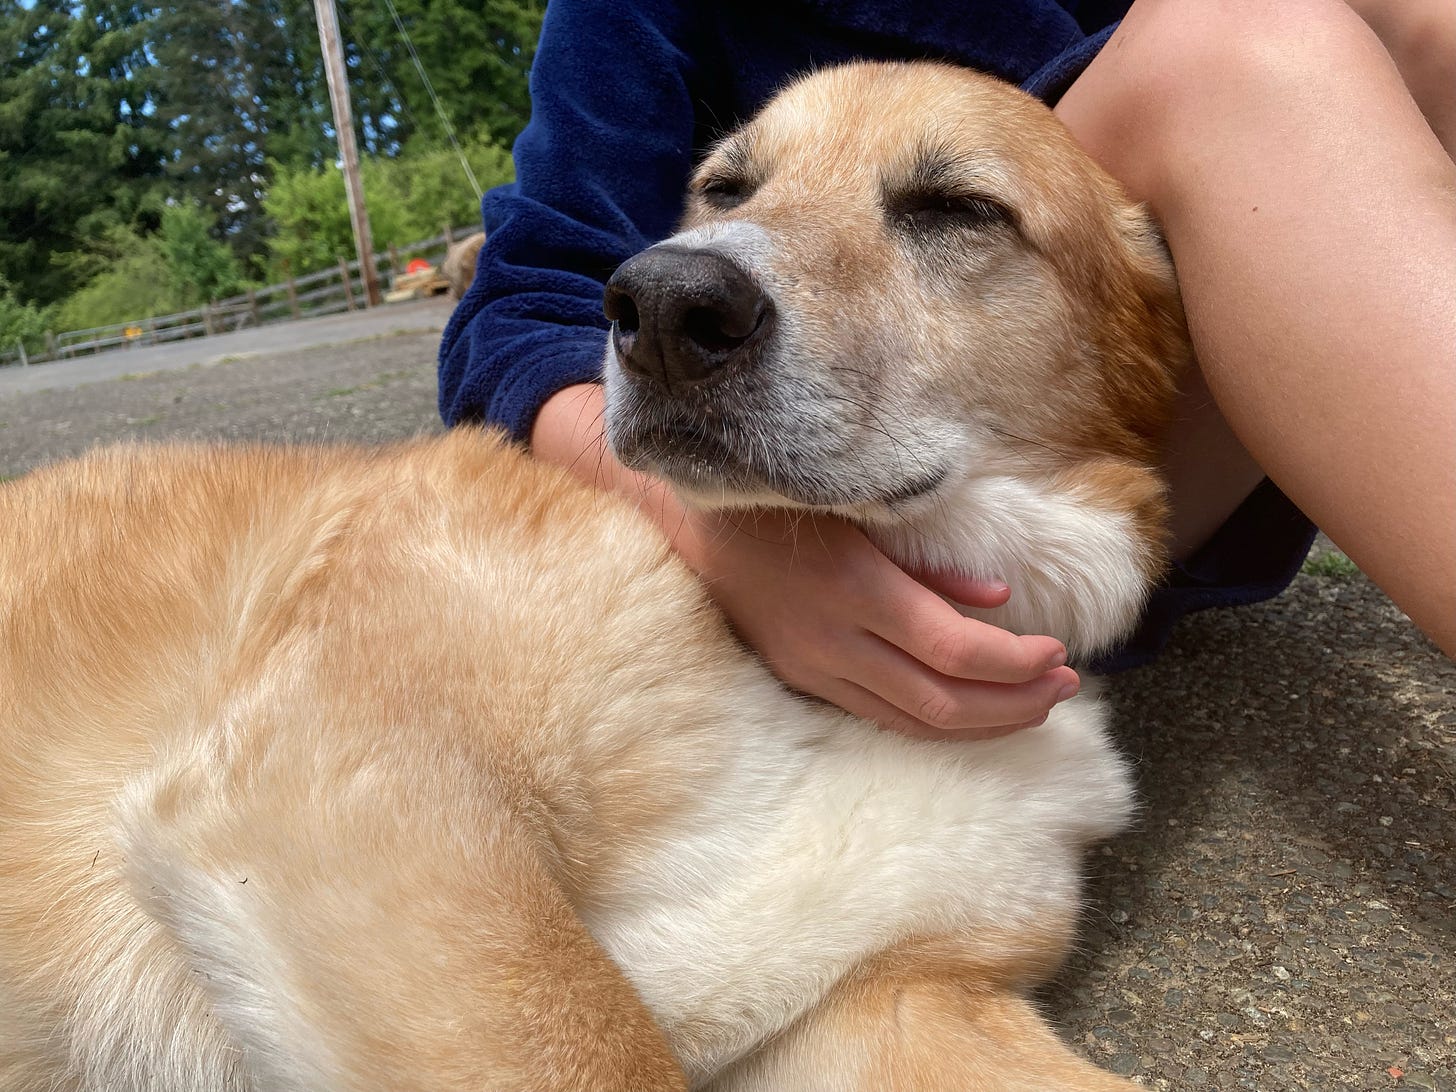 older dog leaning into a human, both reclining on a driveway